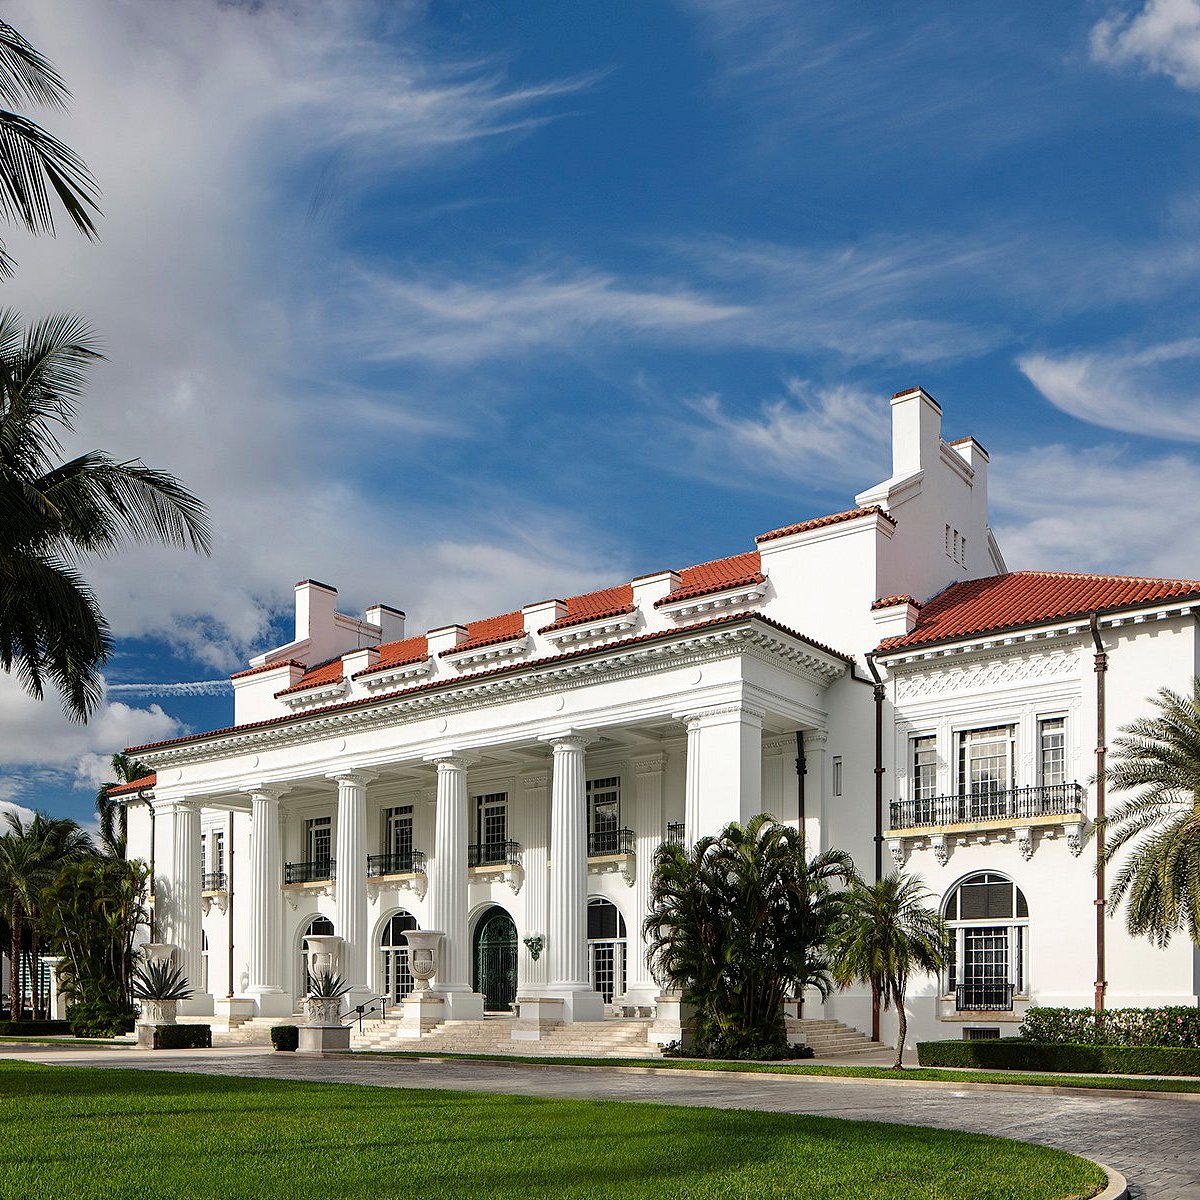 Which billionaire has redone a house near her parents in Palm Beach?